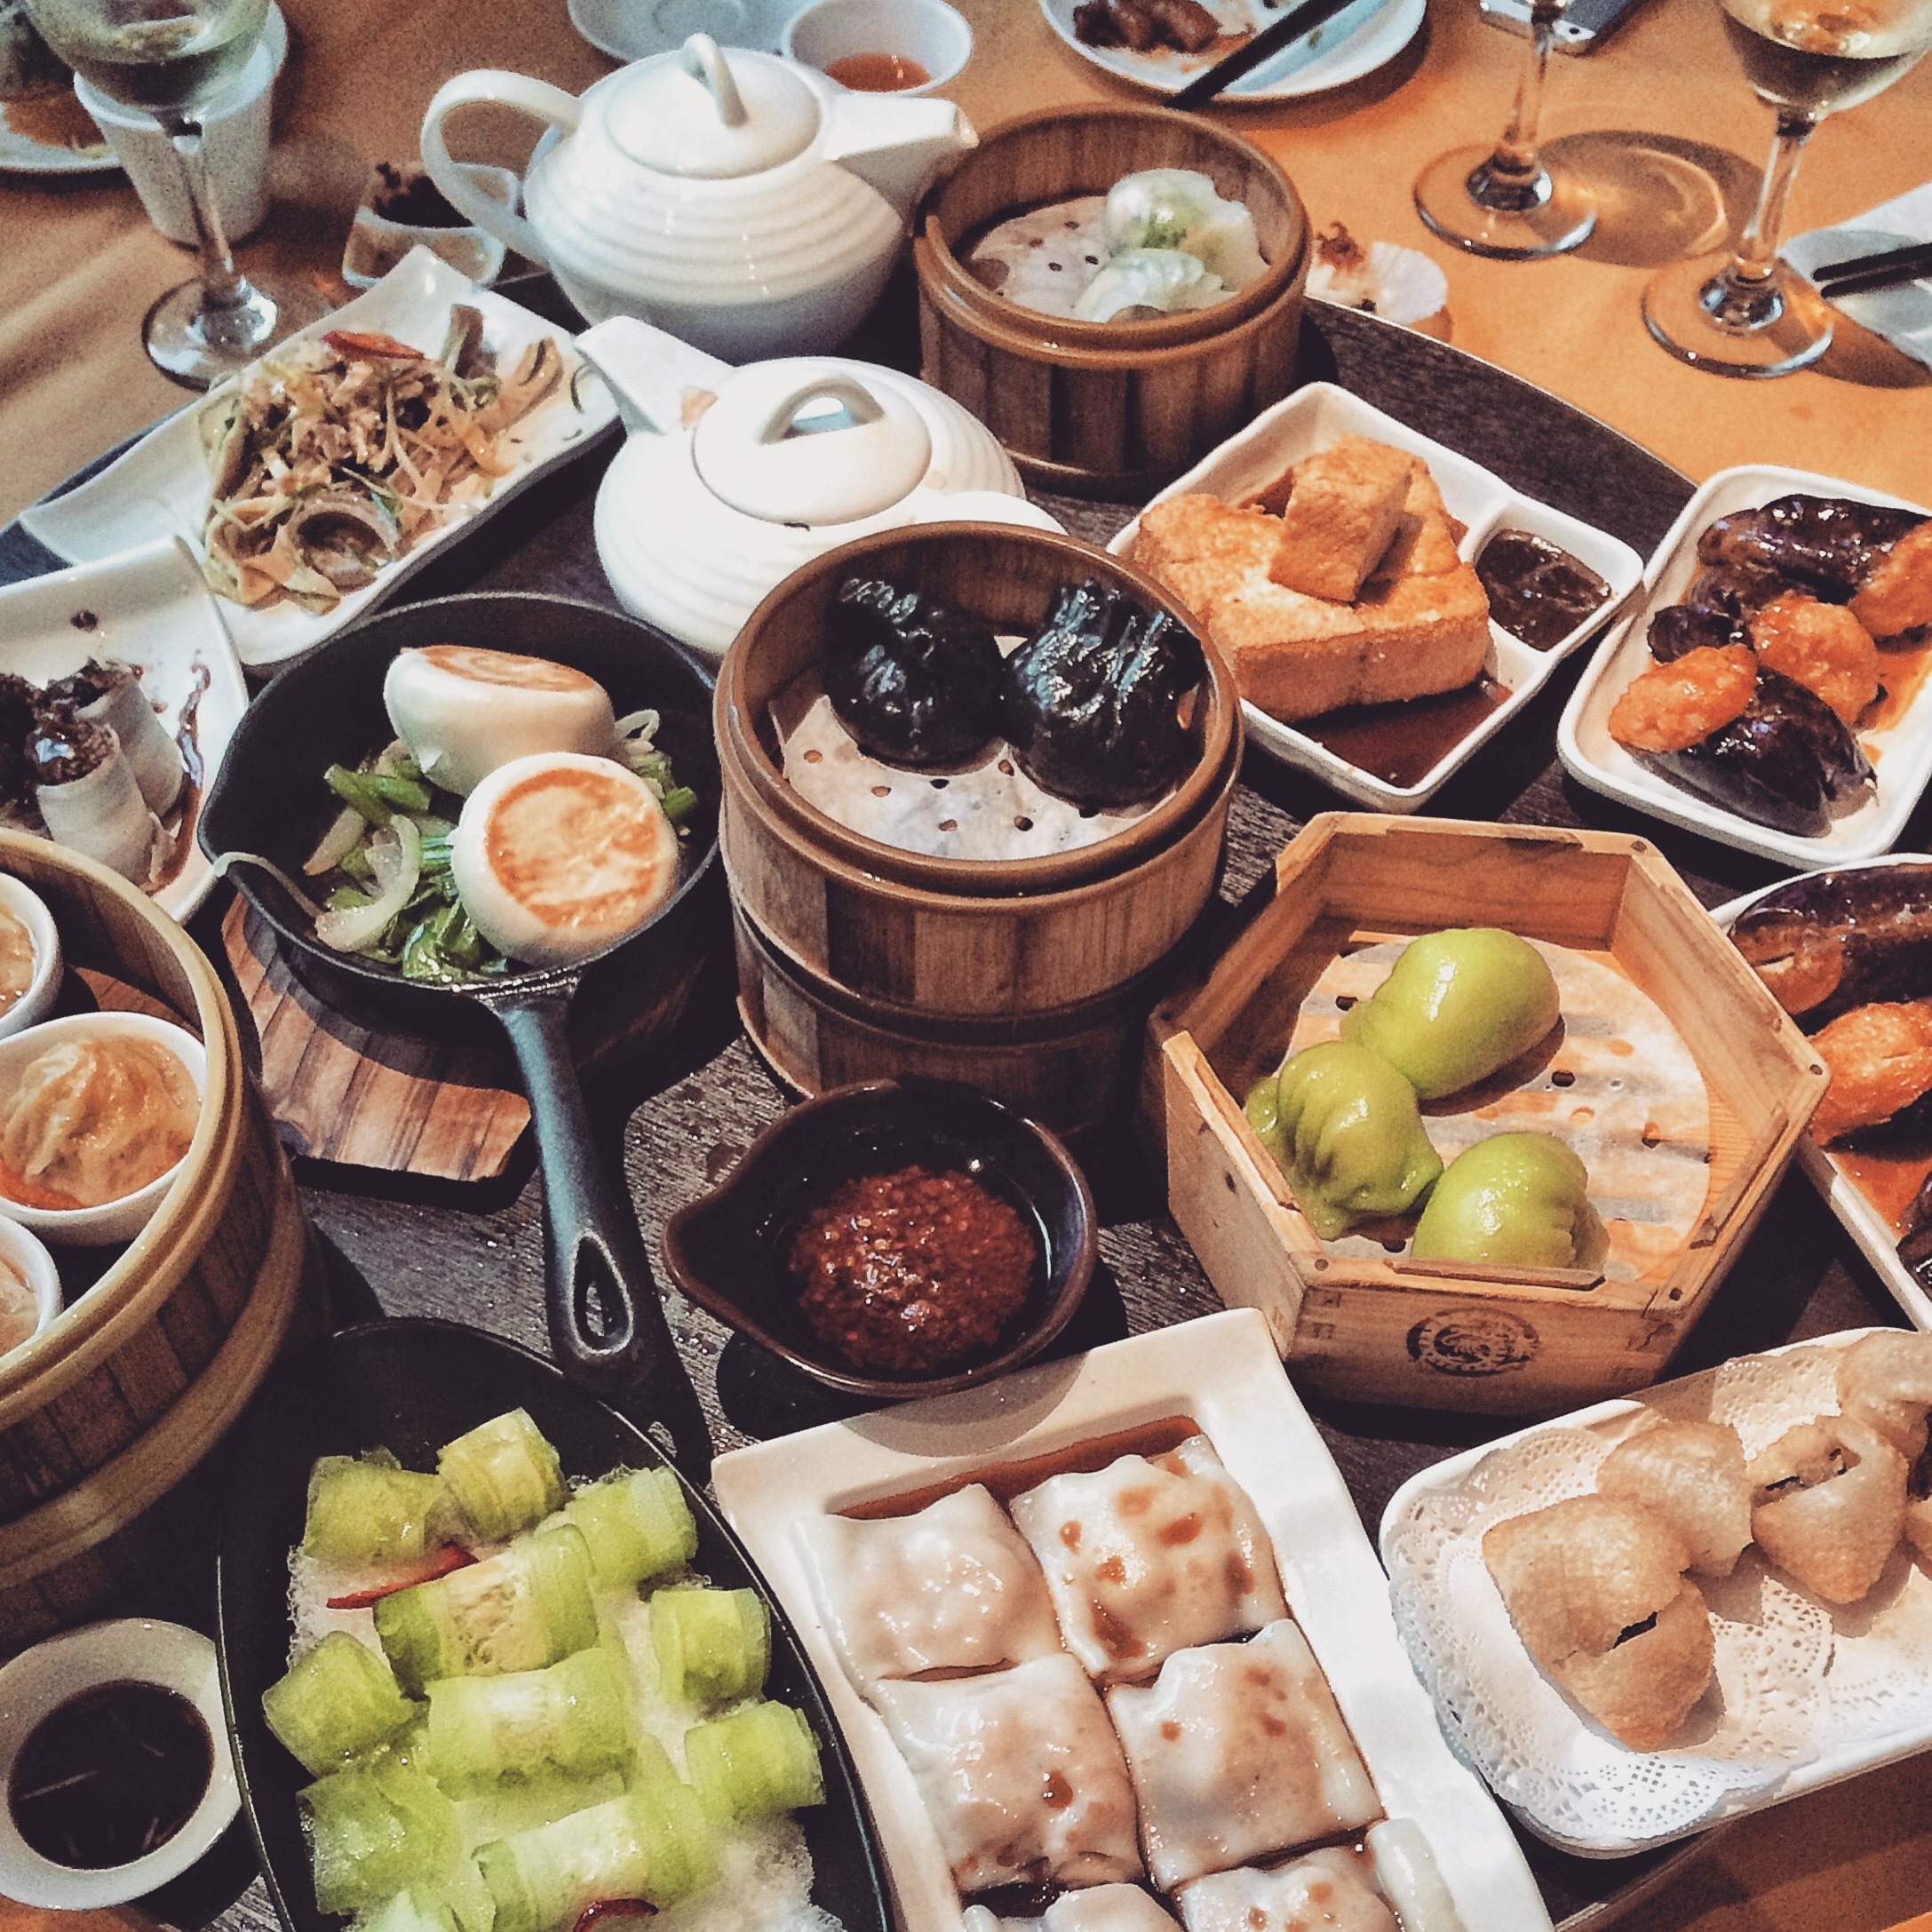 A table full of different types of dishes